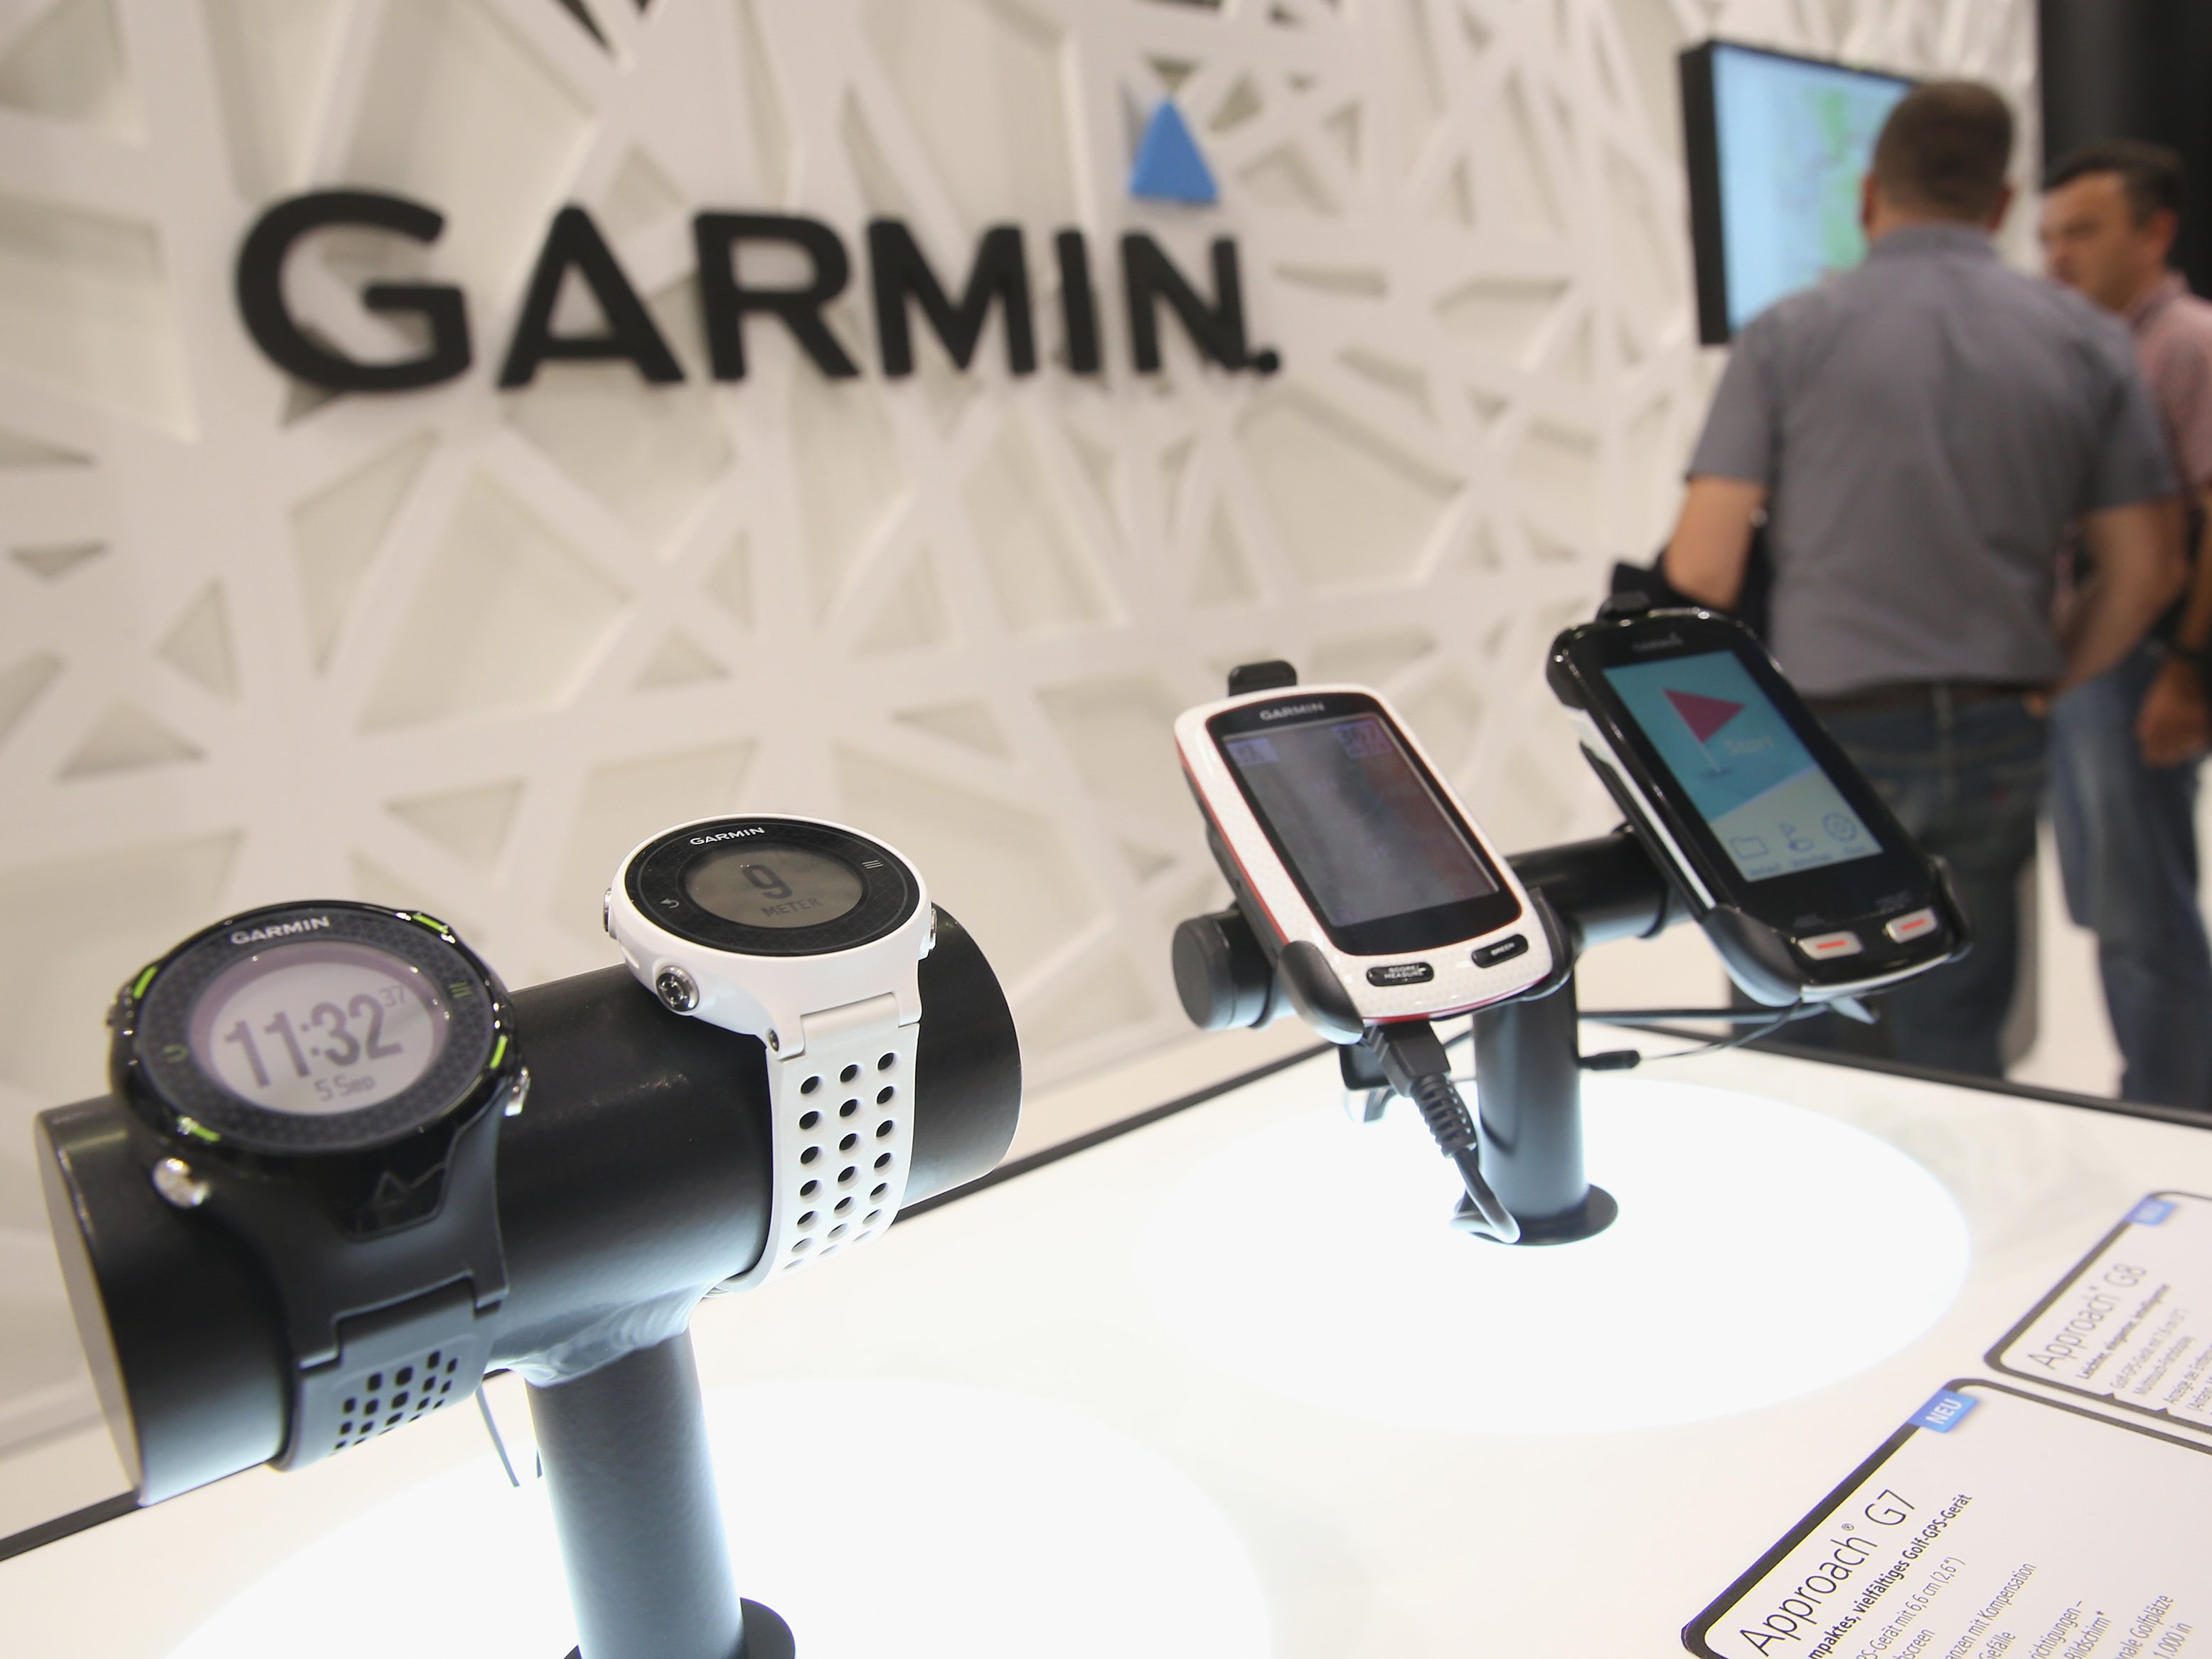 Garmin Stock: Resilient Financials And Sustained Product